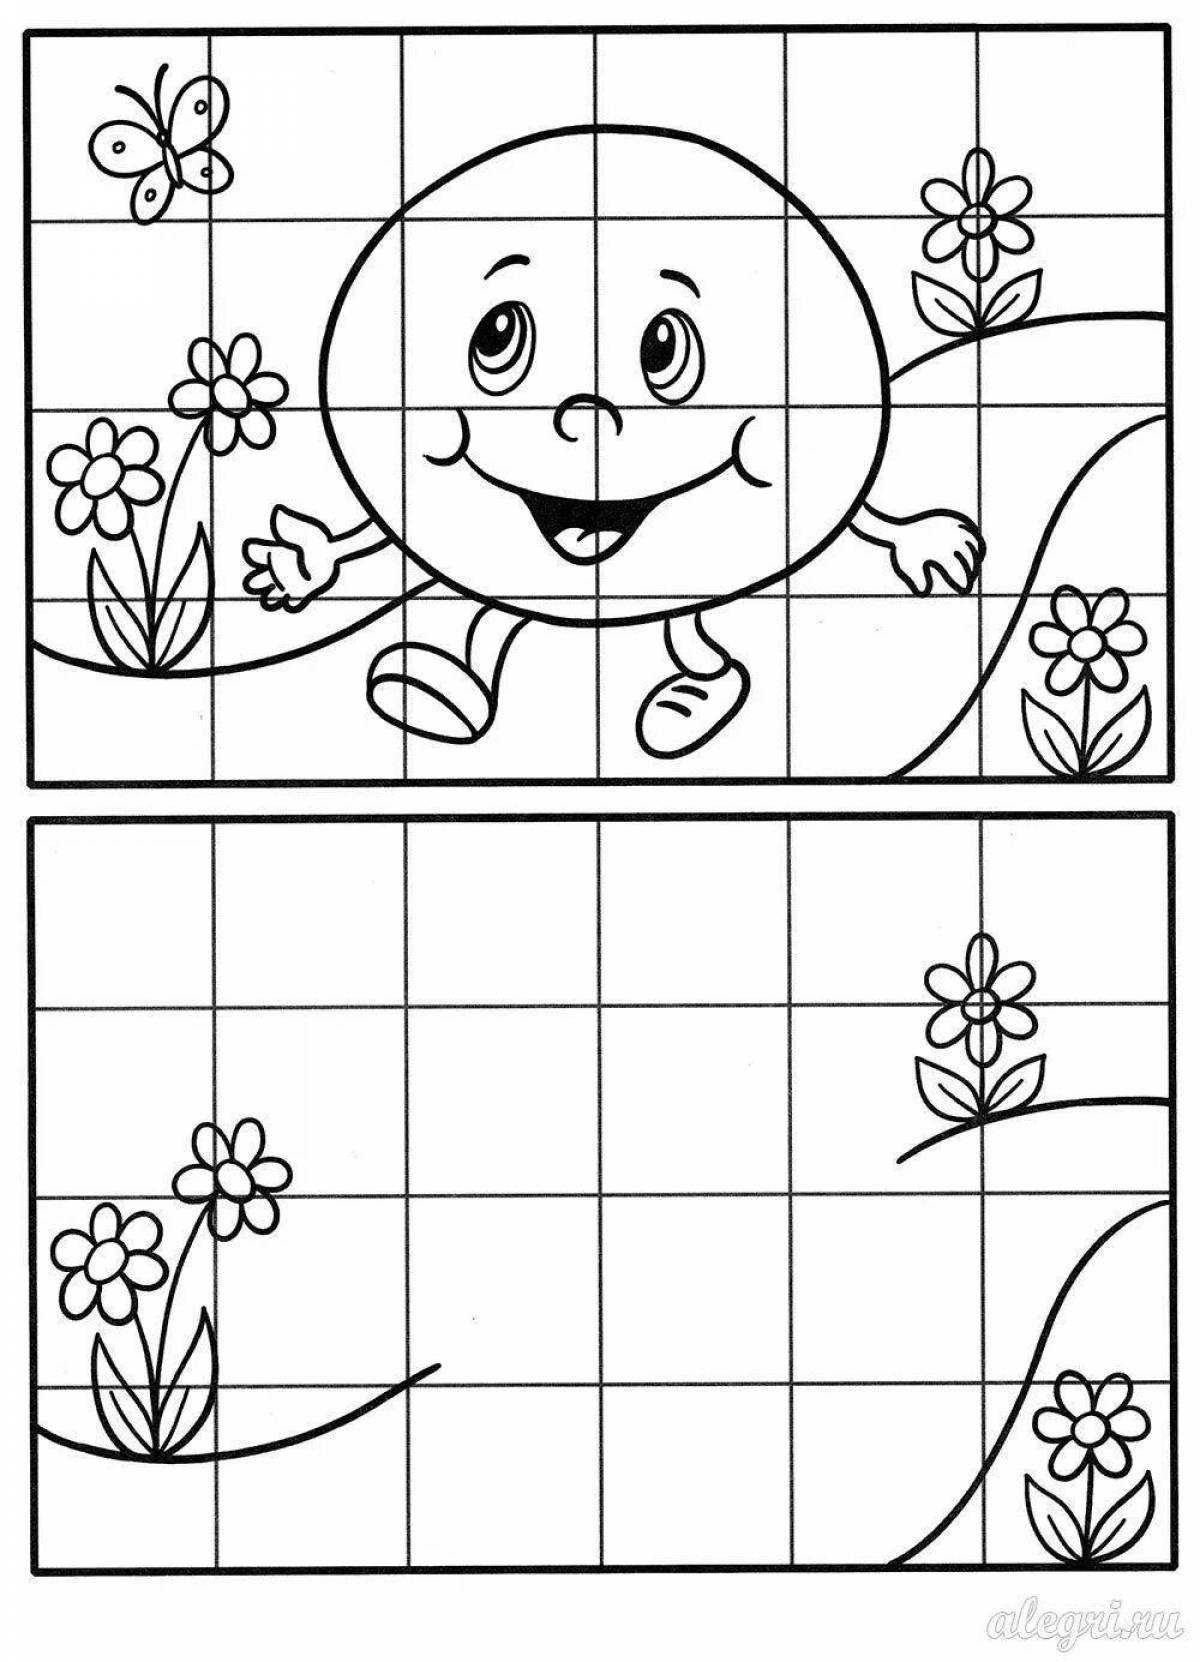 Coloring book funny kolobok for children 6-7 years old